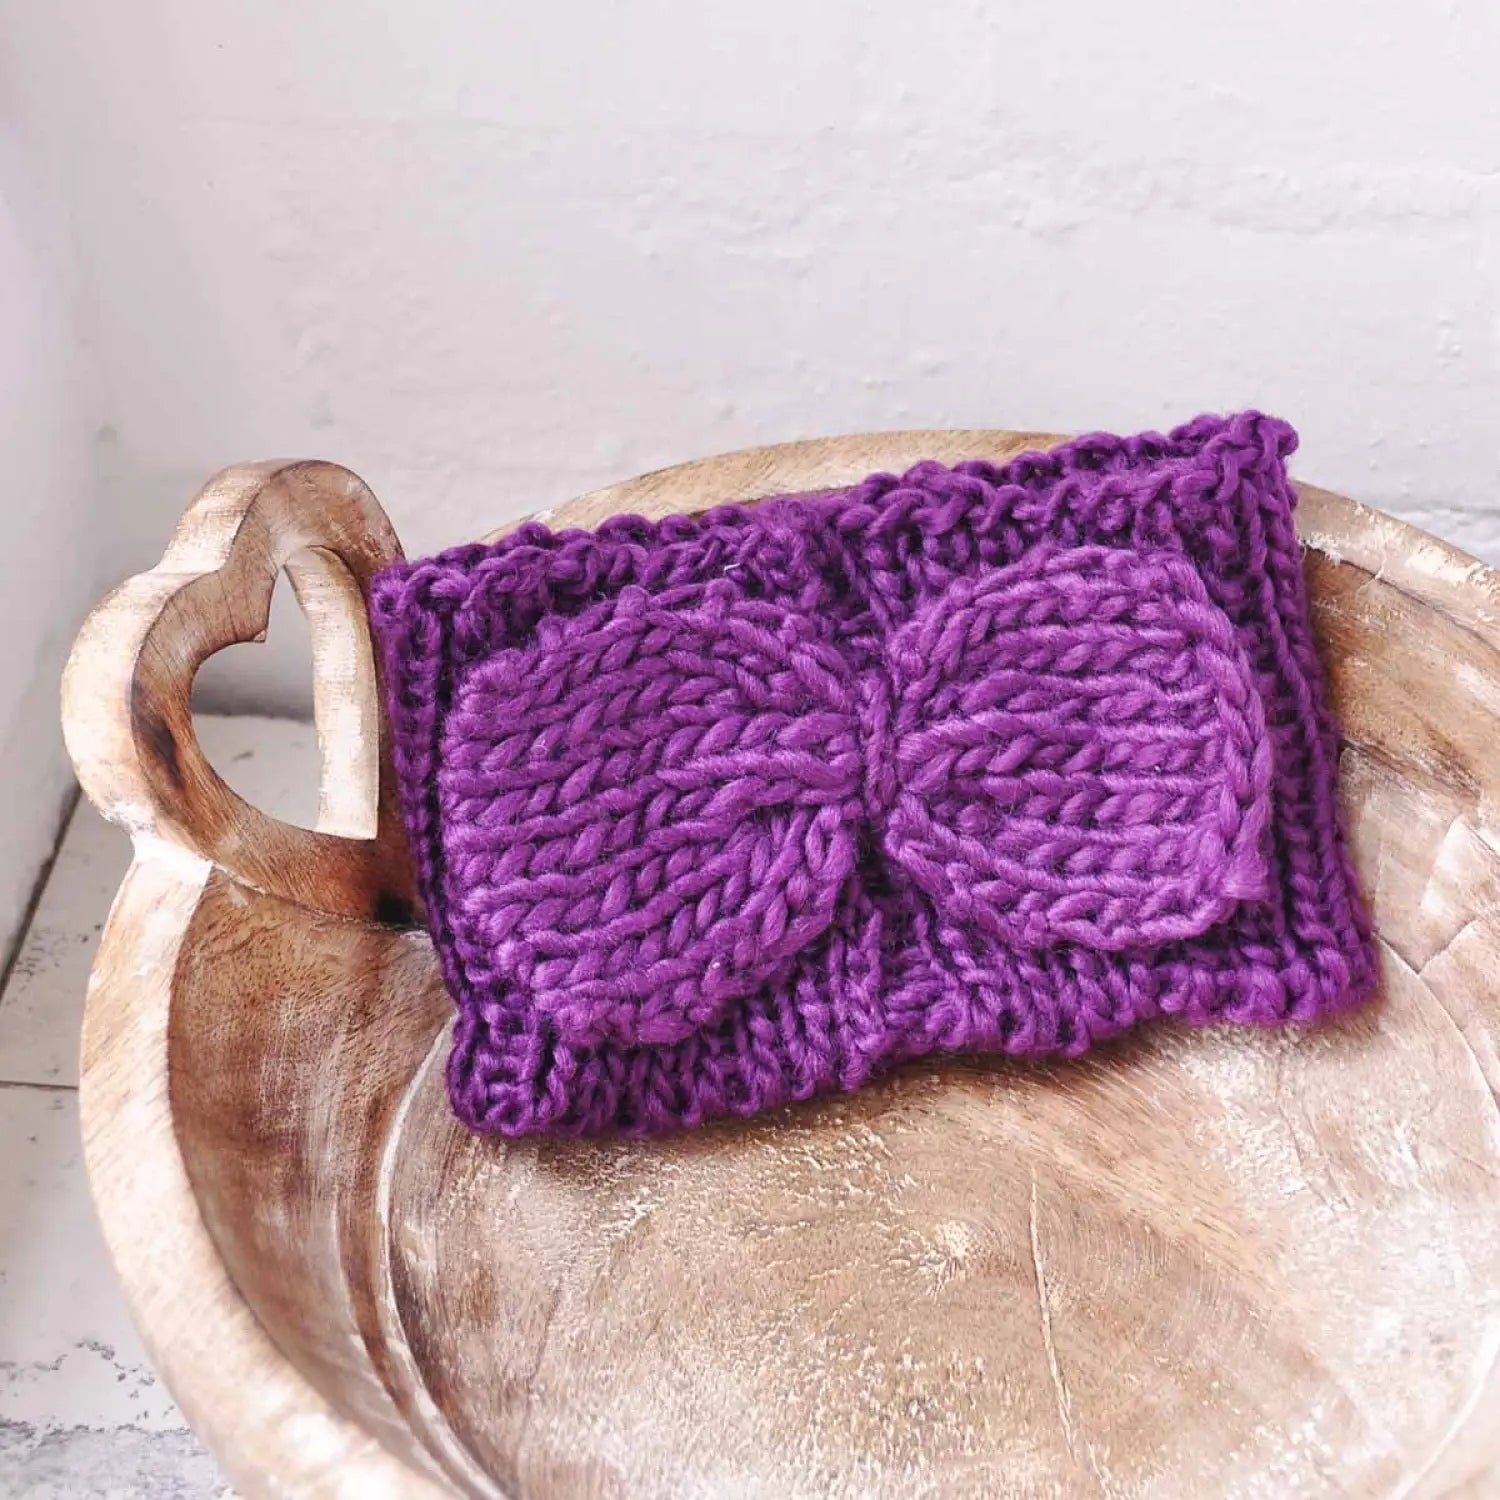 Purple knitted headband with bow detail for autumn & winter fashion.